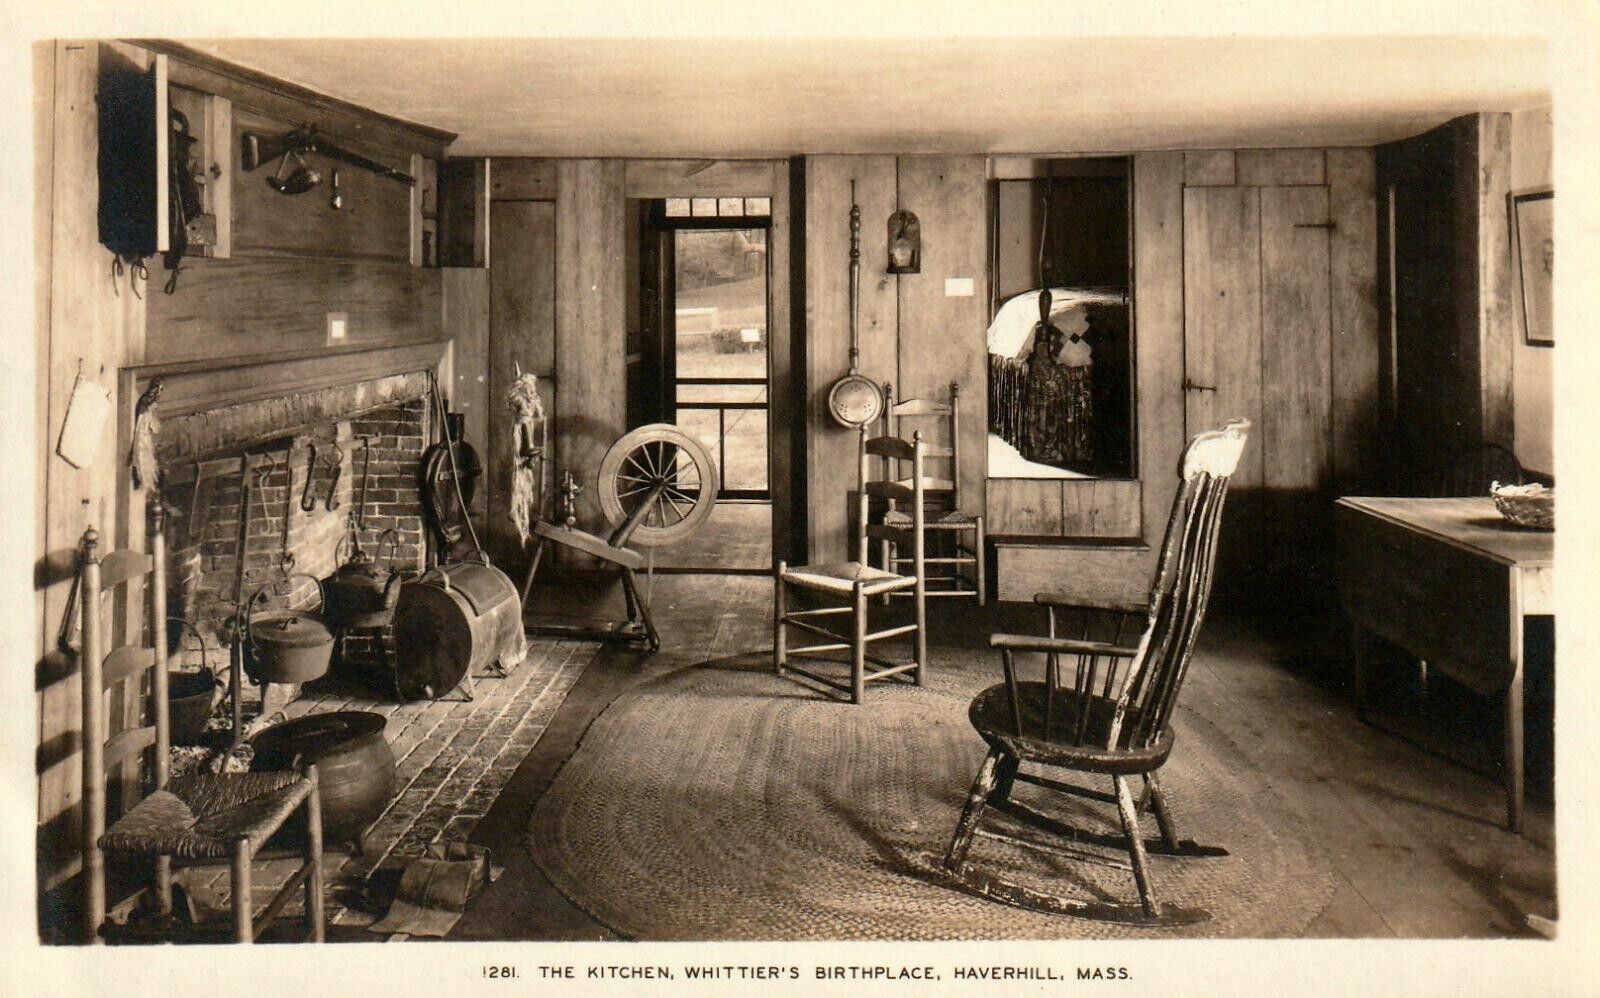 The Kitchen, Whittier's Birthplace - Haverhill, Mass - Real Photo Postcard